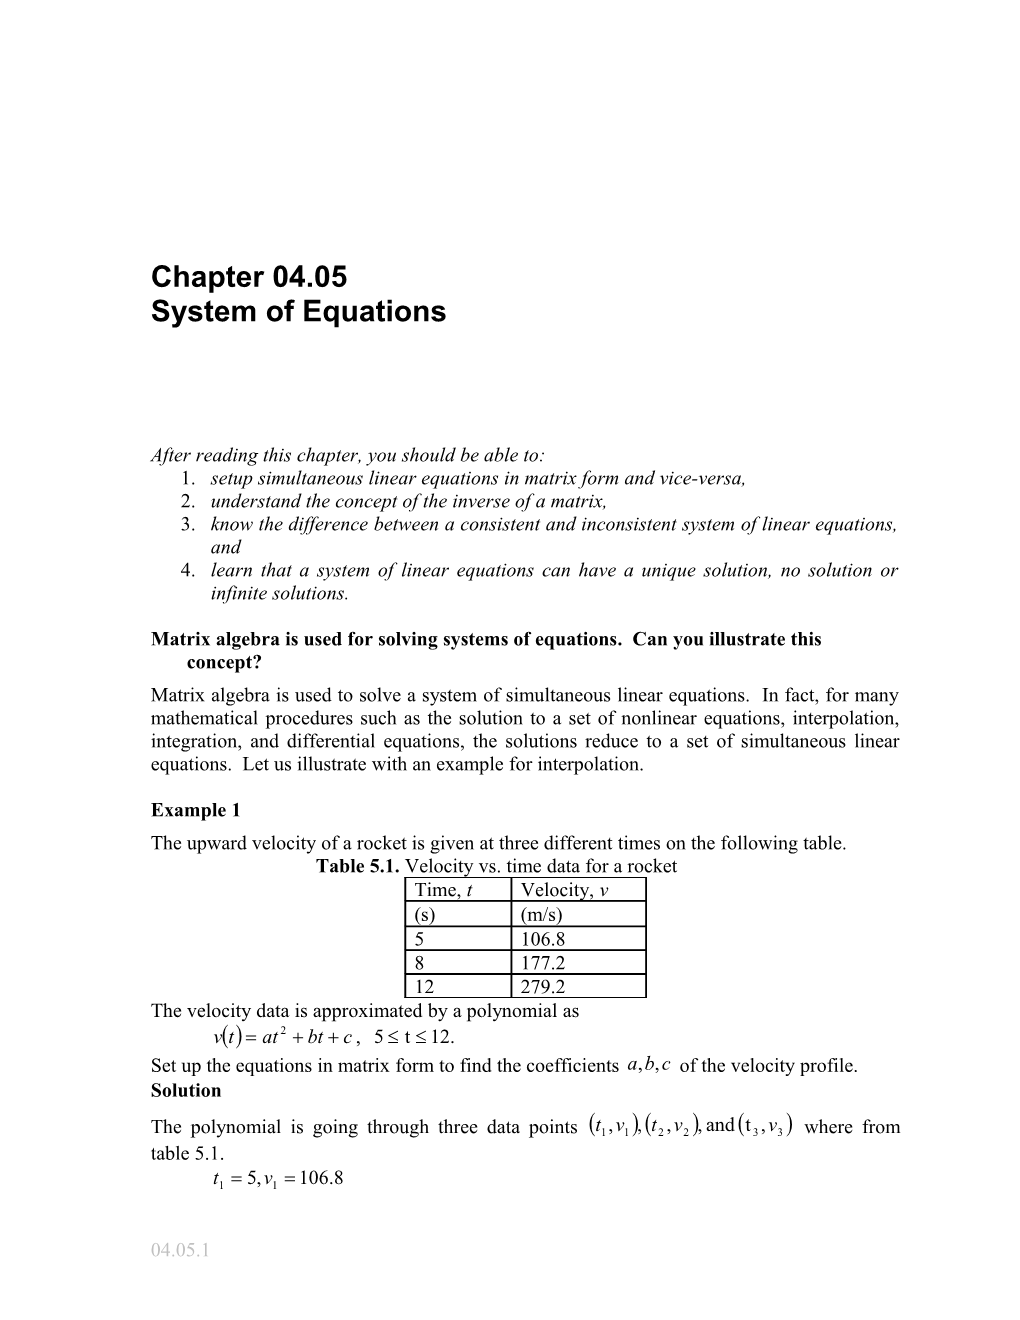 System of Equations: General Engineering